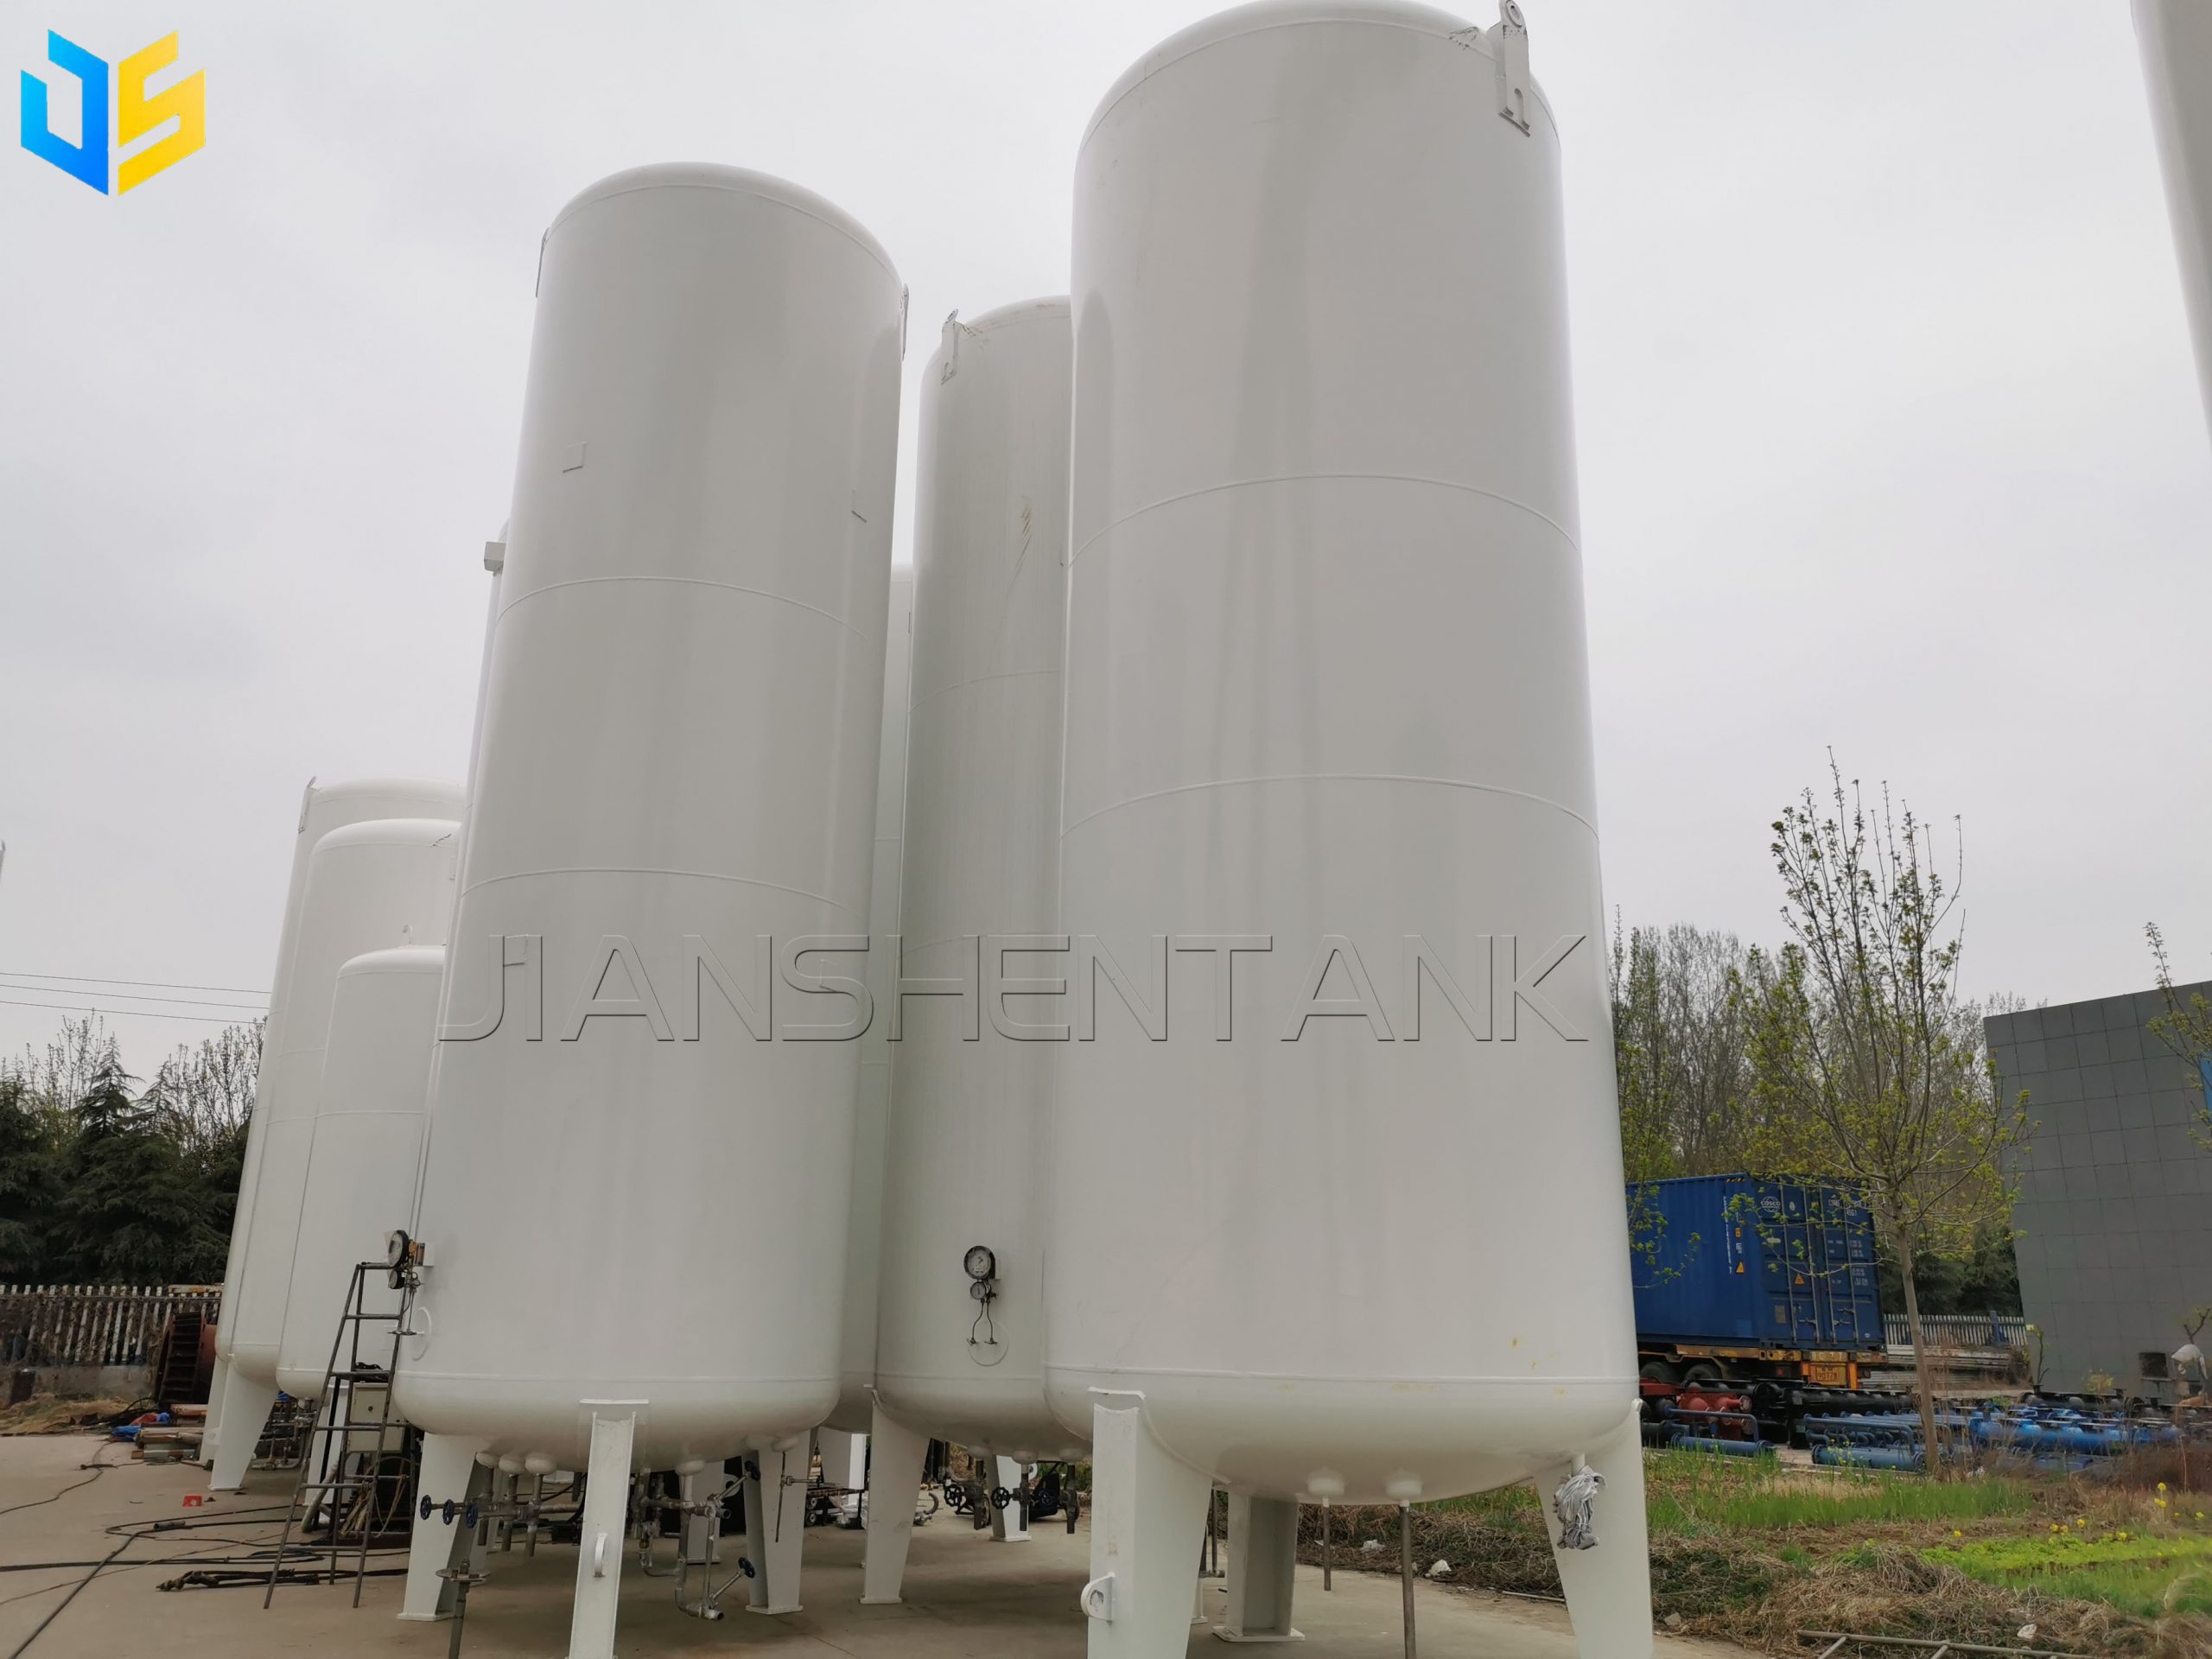 Key products include cryogenic storage tanks